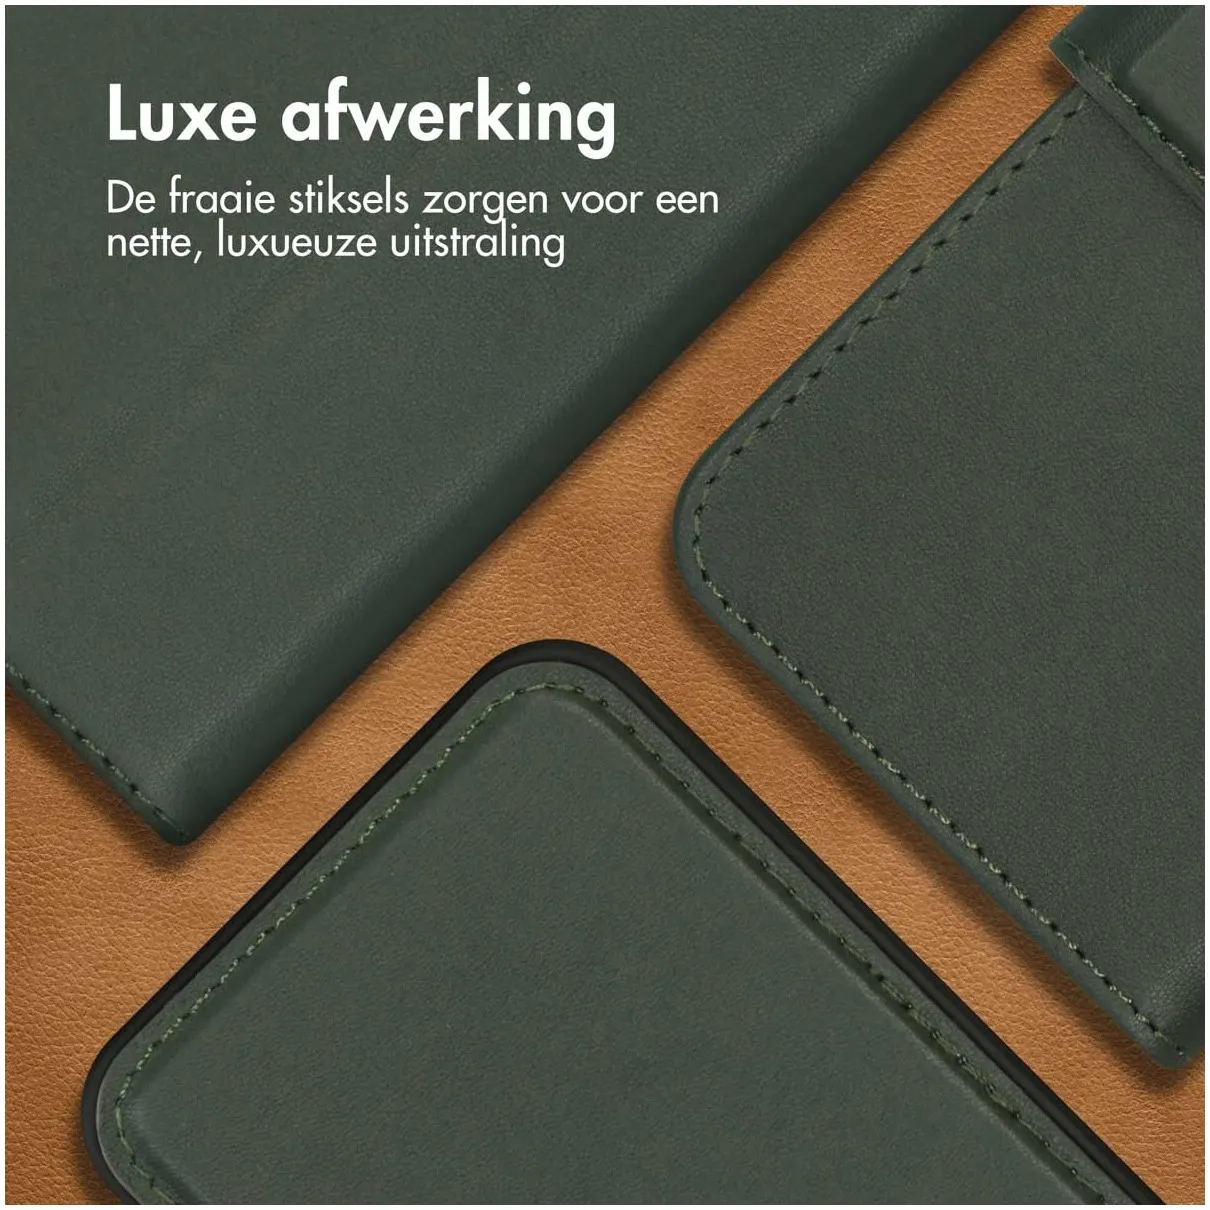 Accezz Premium Leather 2 in 1 Wallet Bookcase iPhone 15 Plus Groen